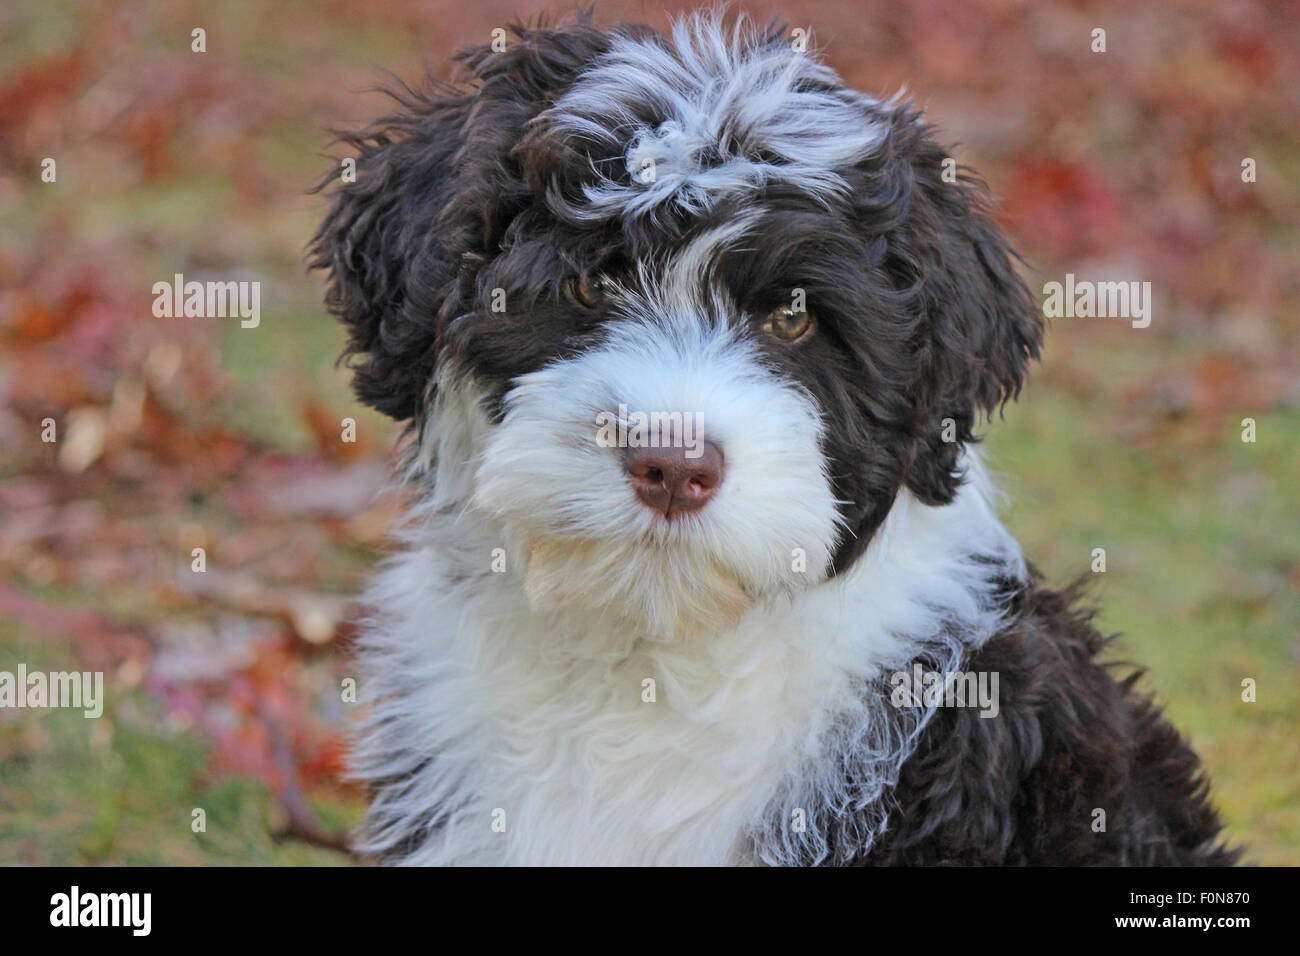 Brown And White Portuguese Water Dog Puppy In A Backyard In Fall Stock Photo Alamy